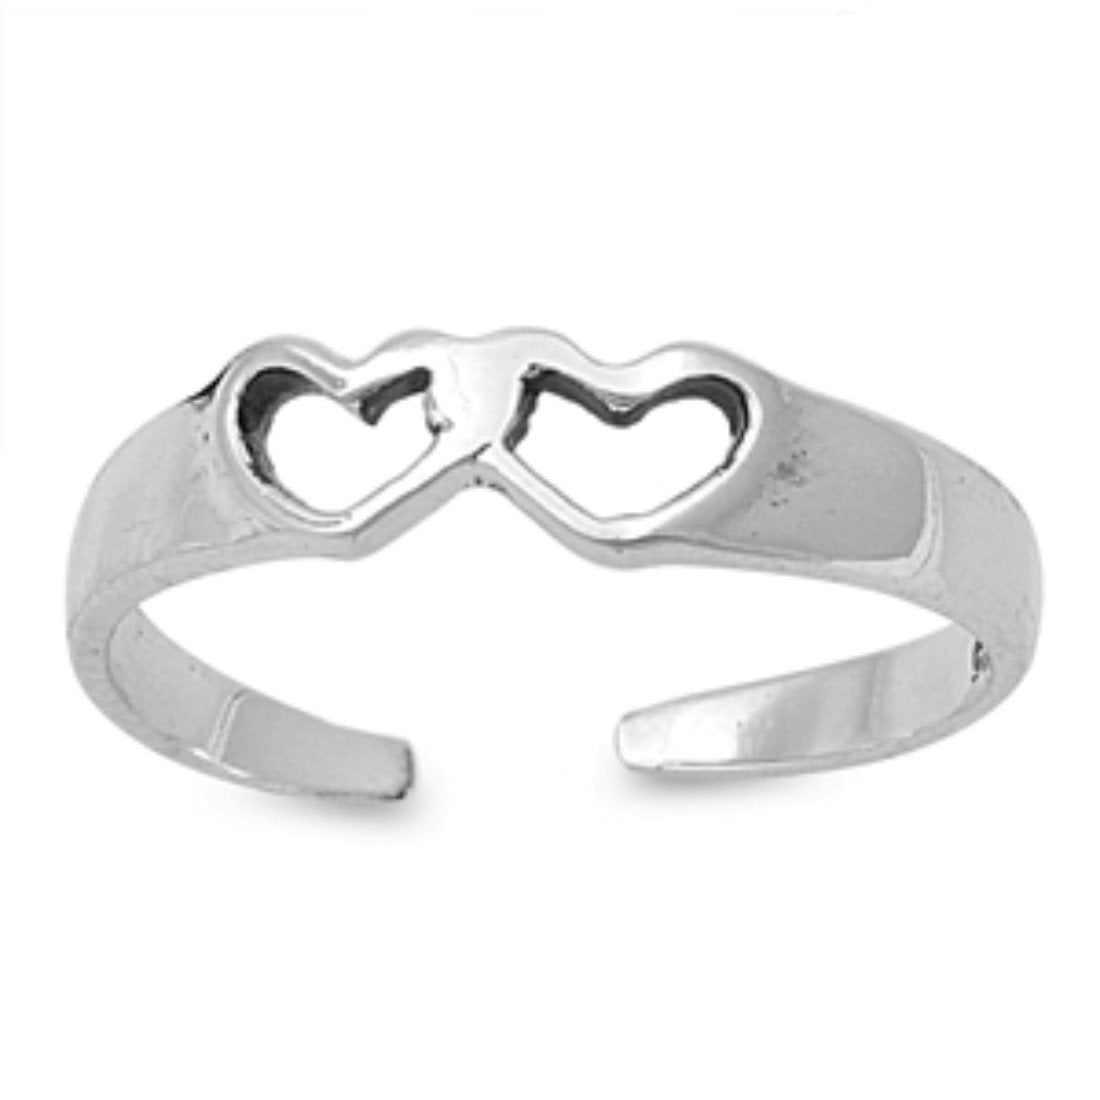 Hearts Silver Toe Ring Band Adjustable 925 Sterling Silver (4mm)